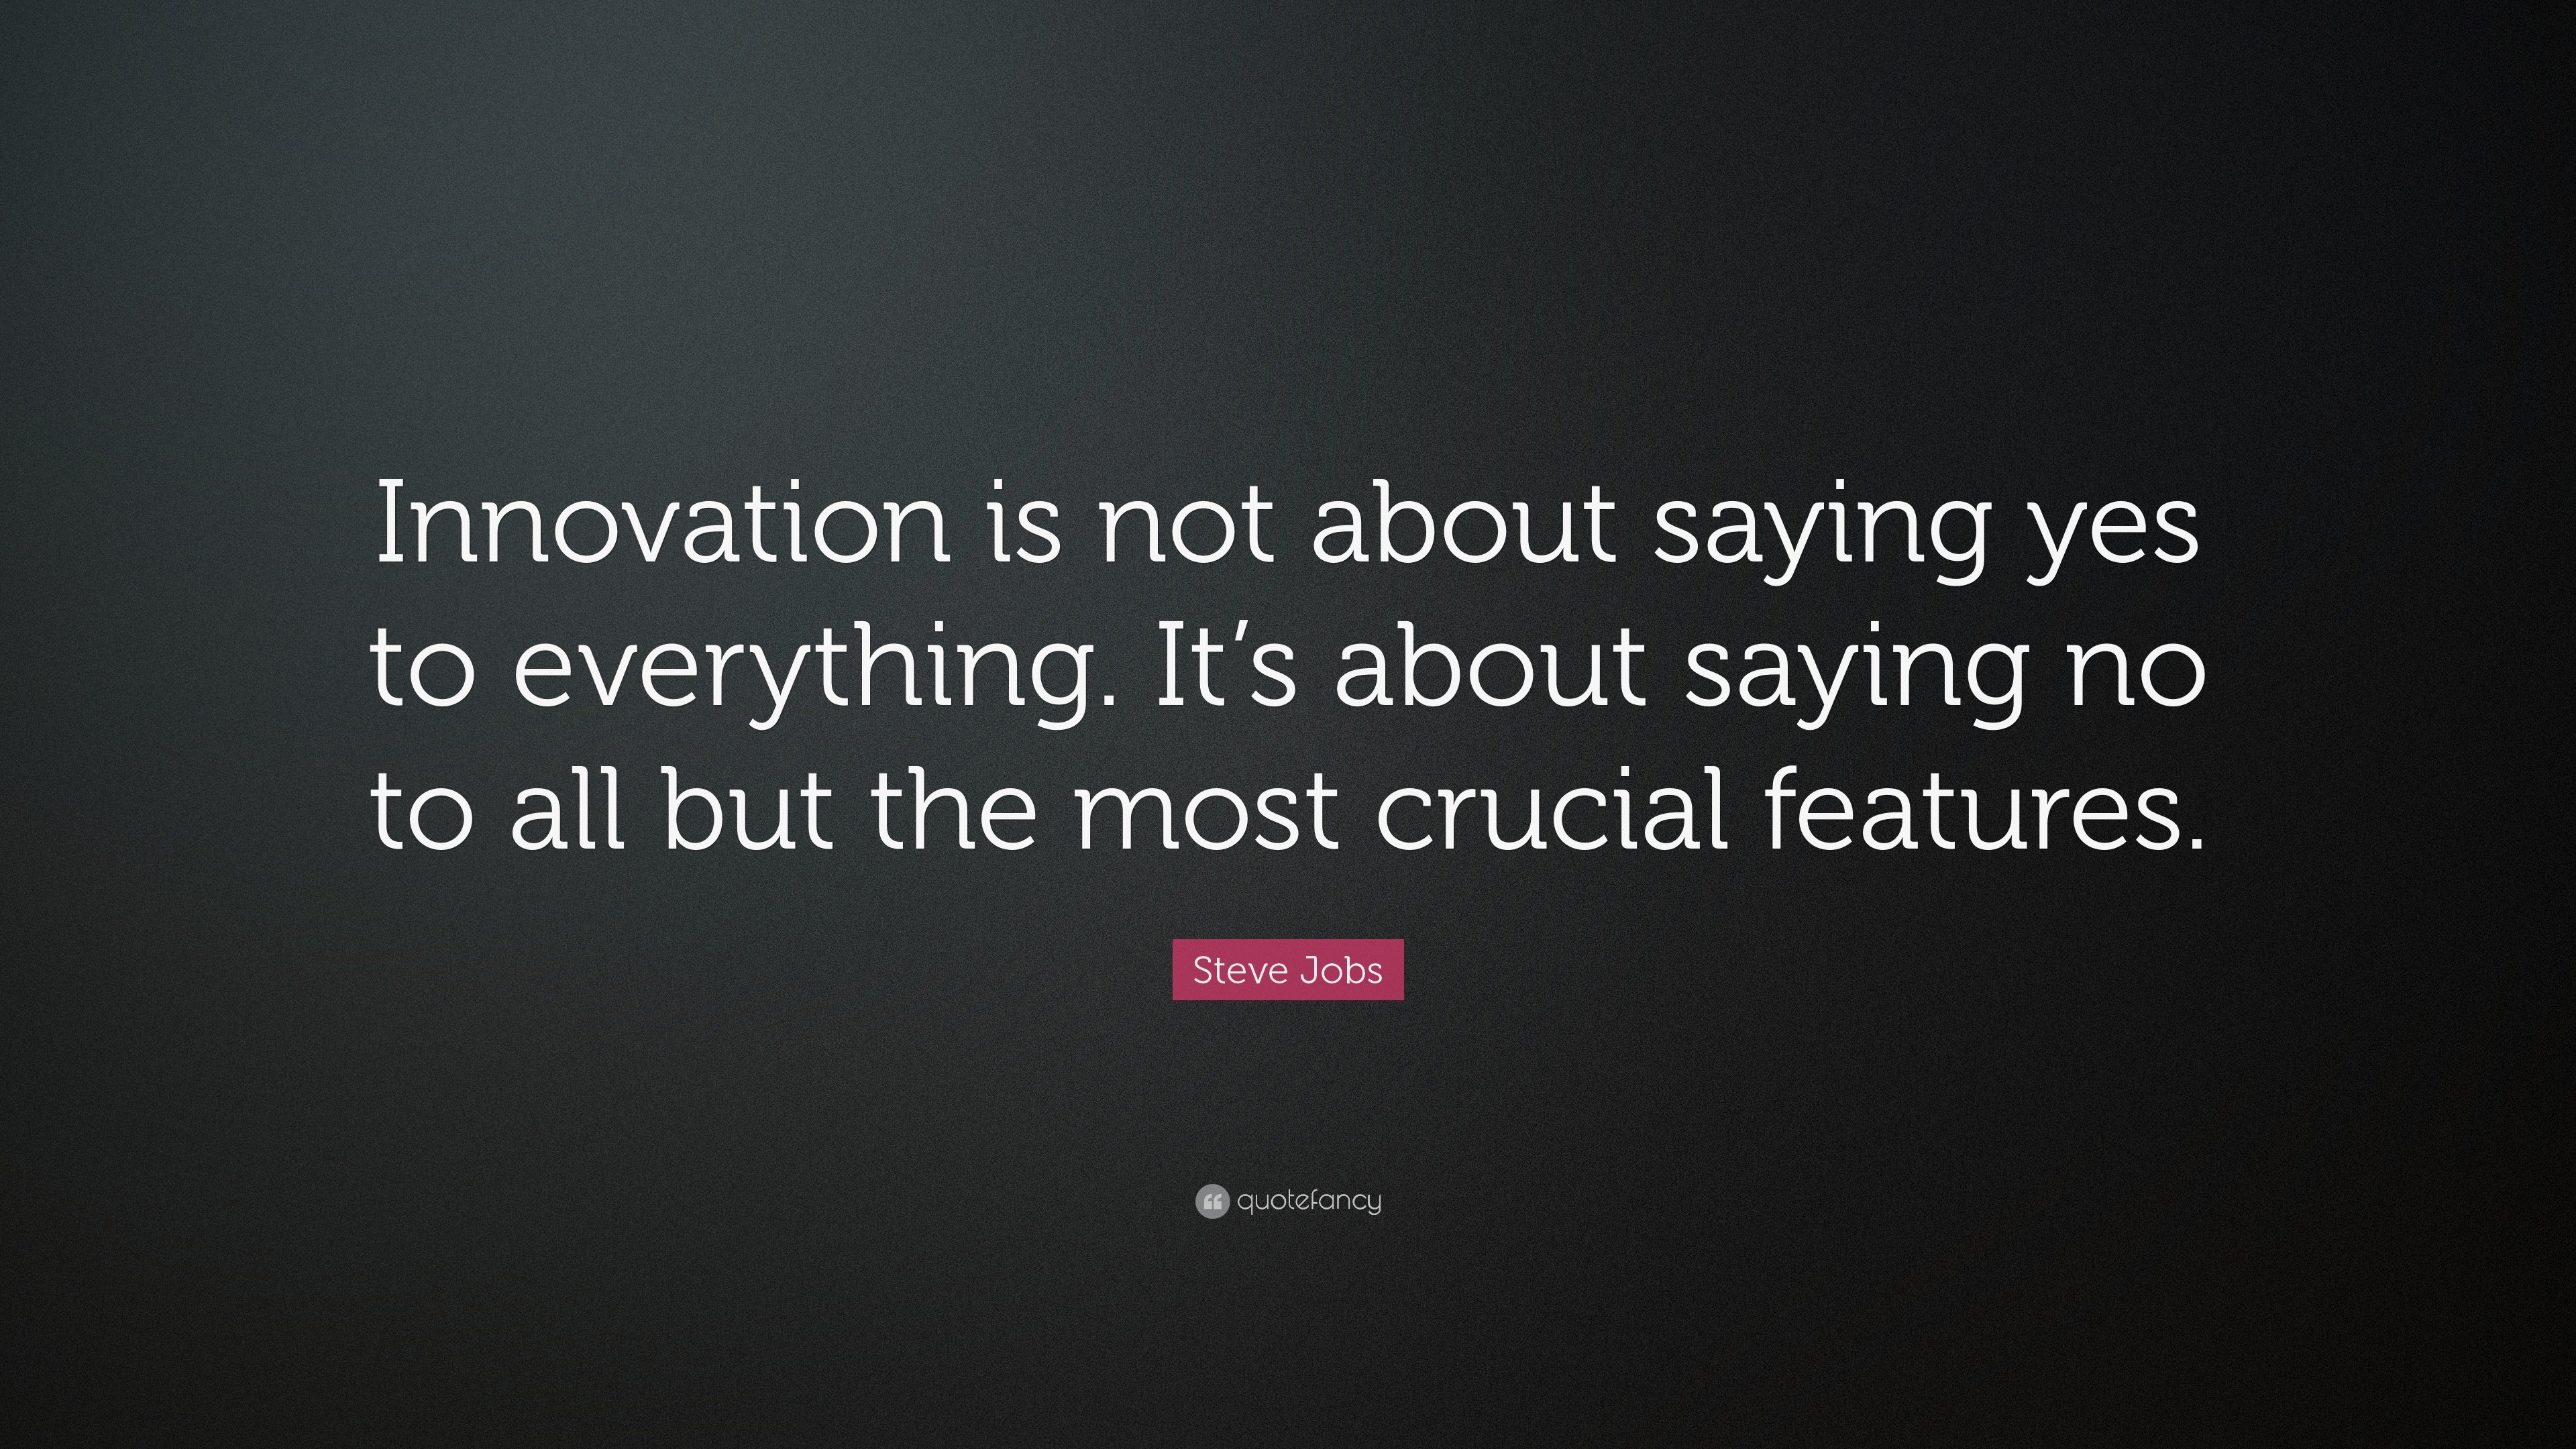 Steve Jobs Quote: “Innovation is not about saying yes to everything. It ...